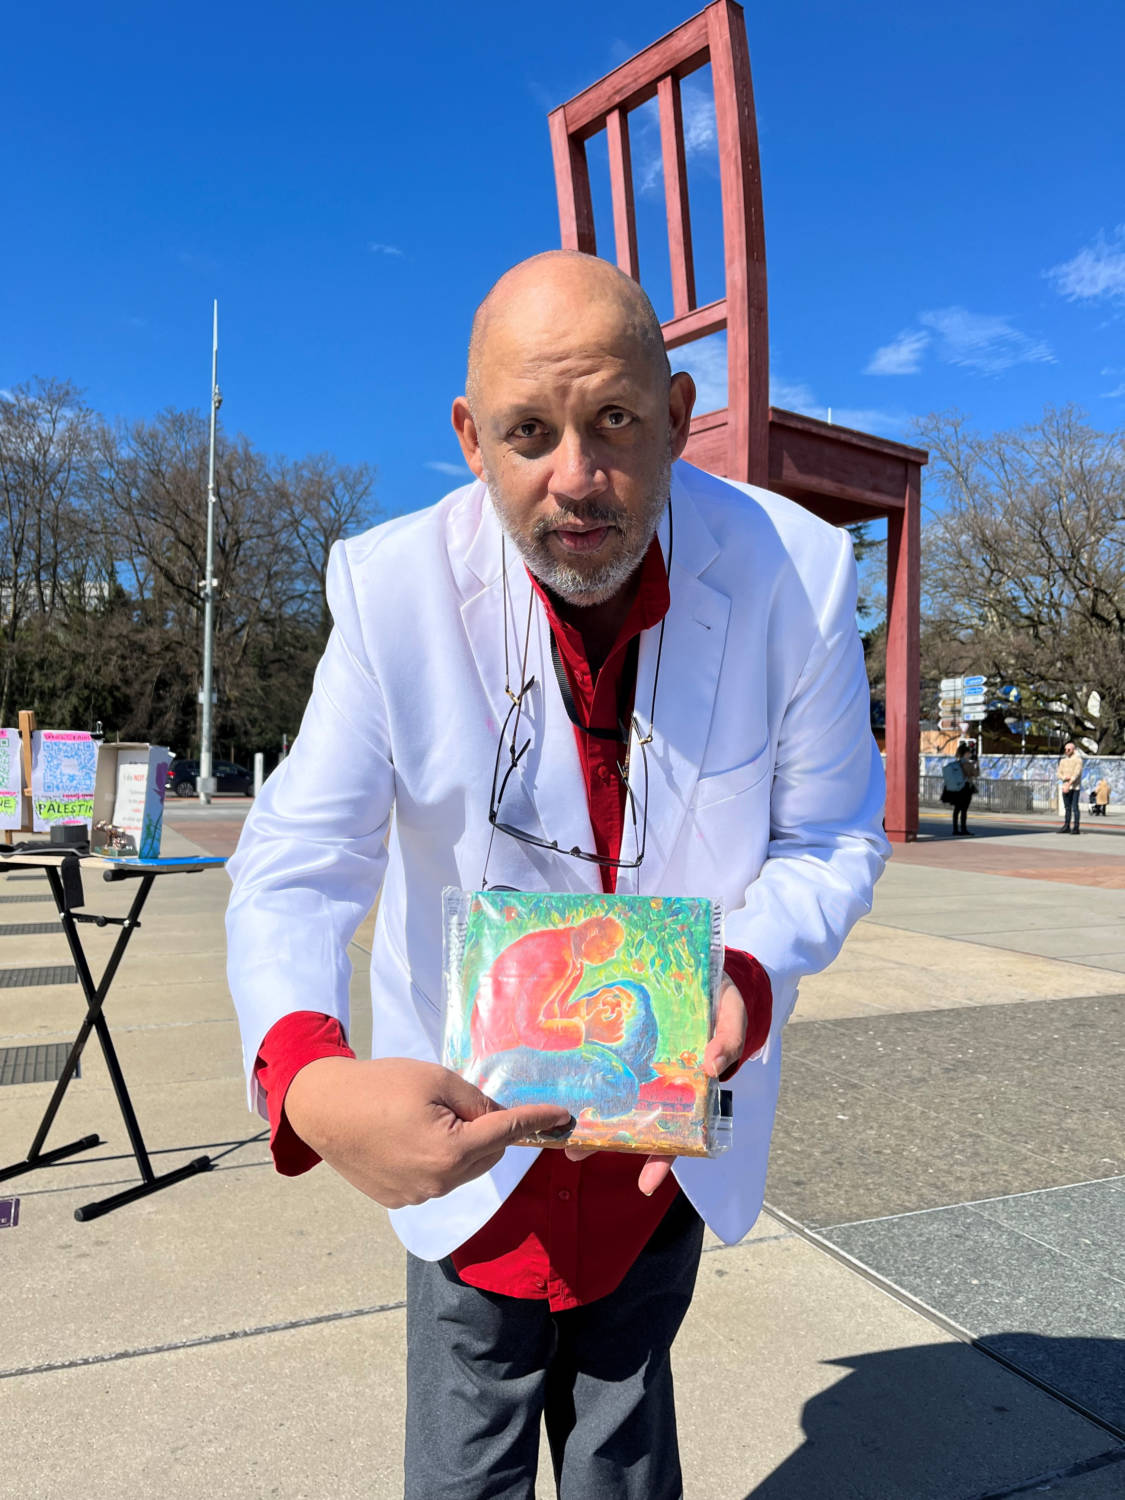 Bruno Donat Holds Up A Painting By A Gazan Artist During A Hunger Strike For Children Affected During The Conflict Between Israel And Hamas, In Geneva